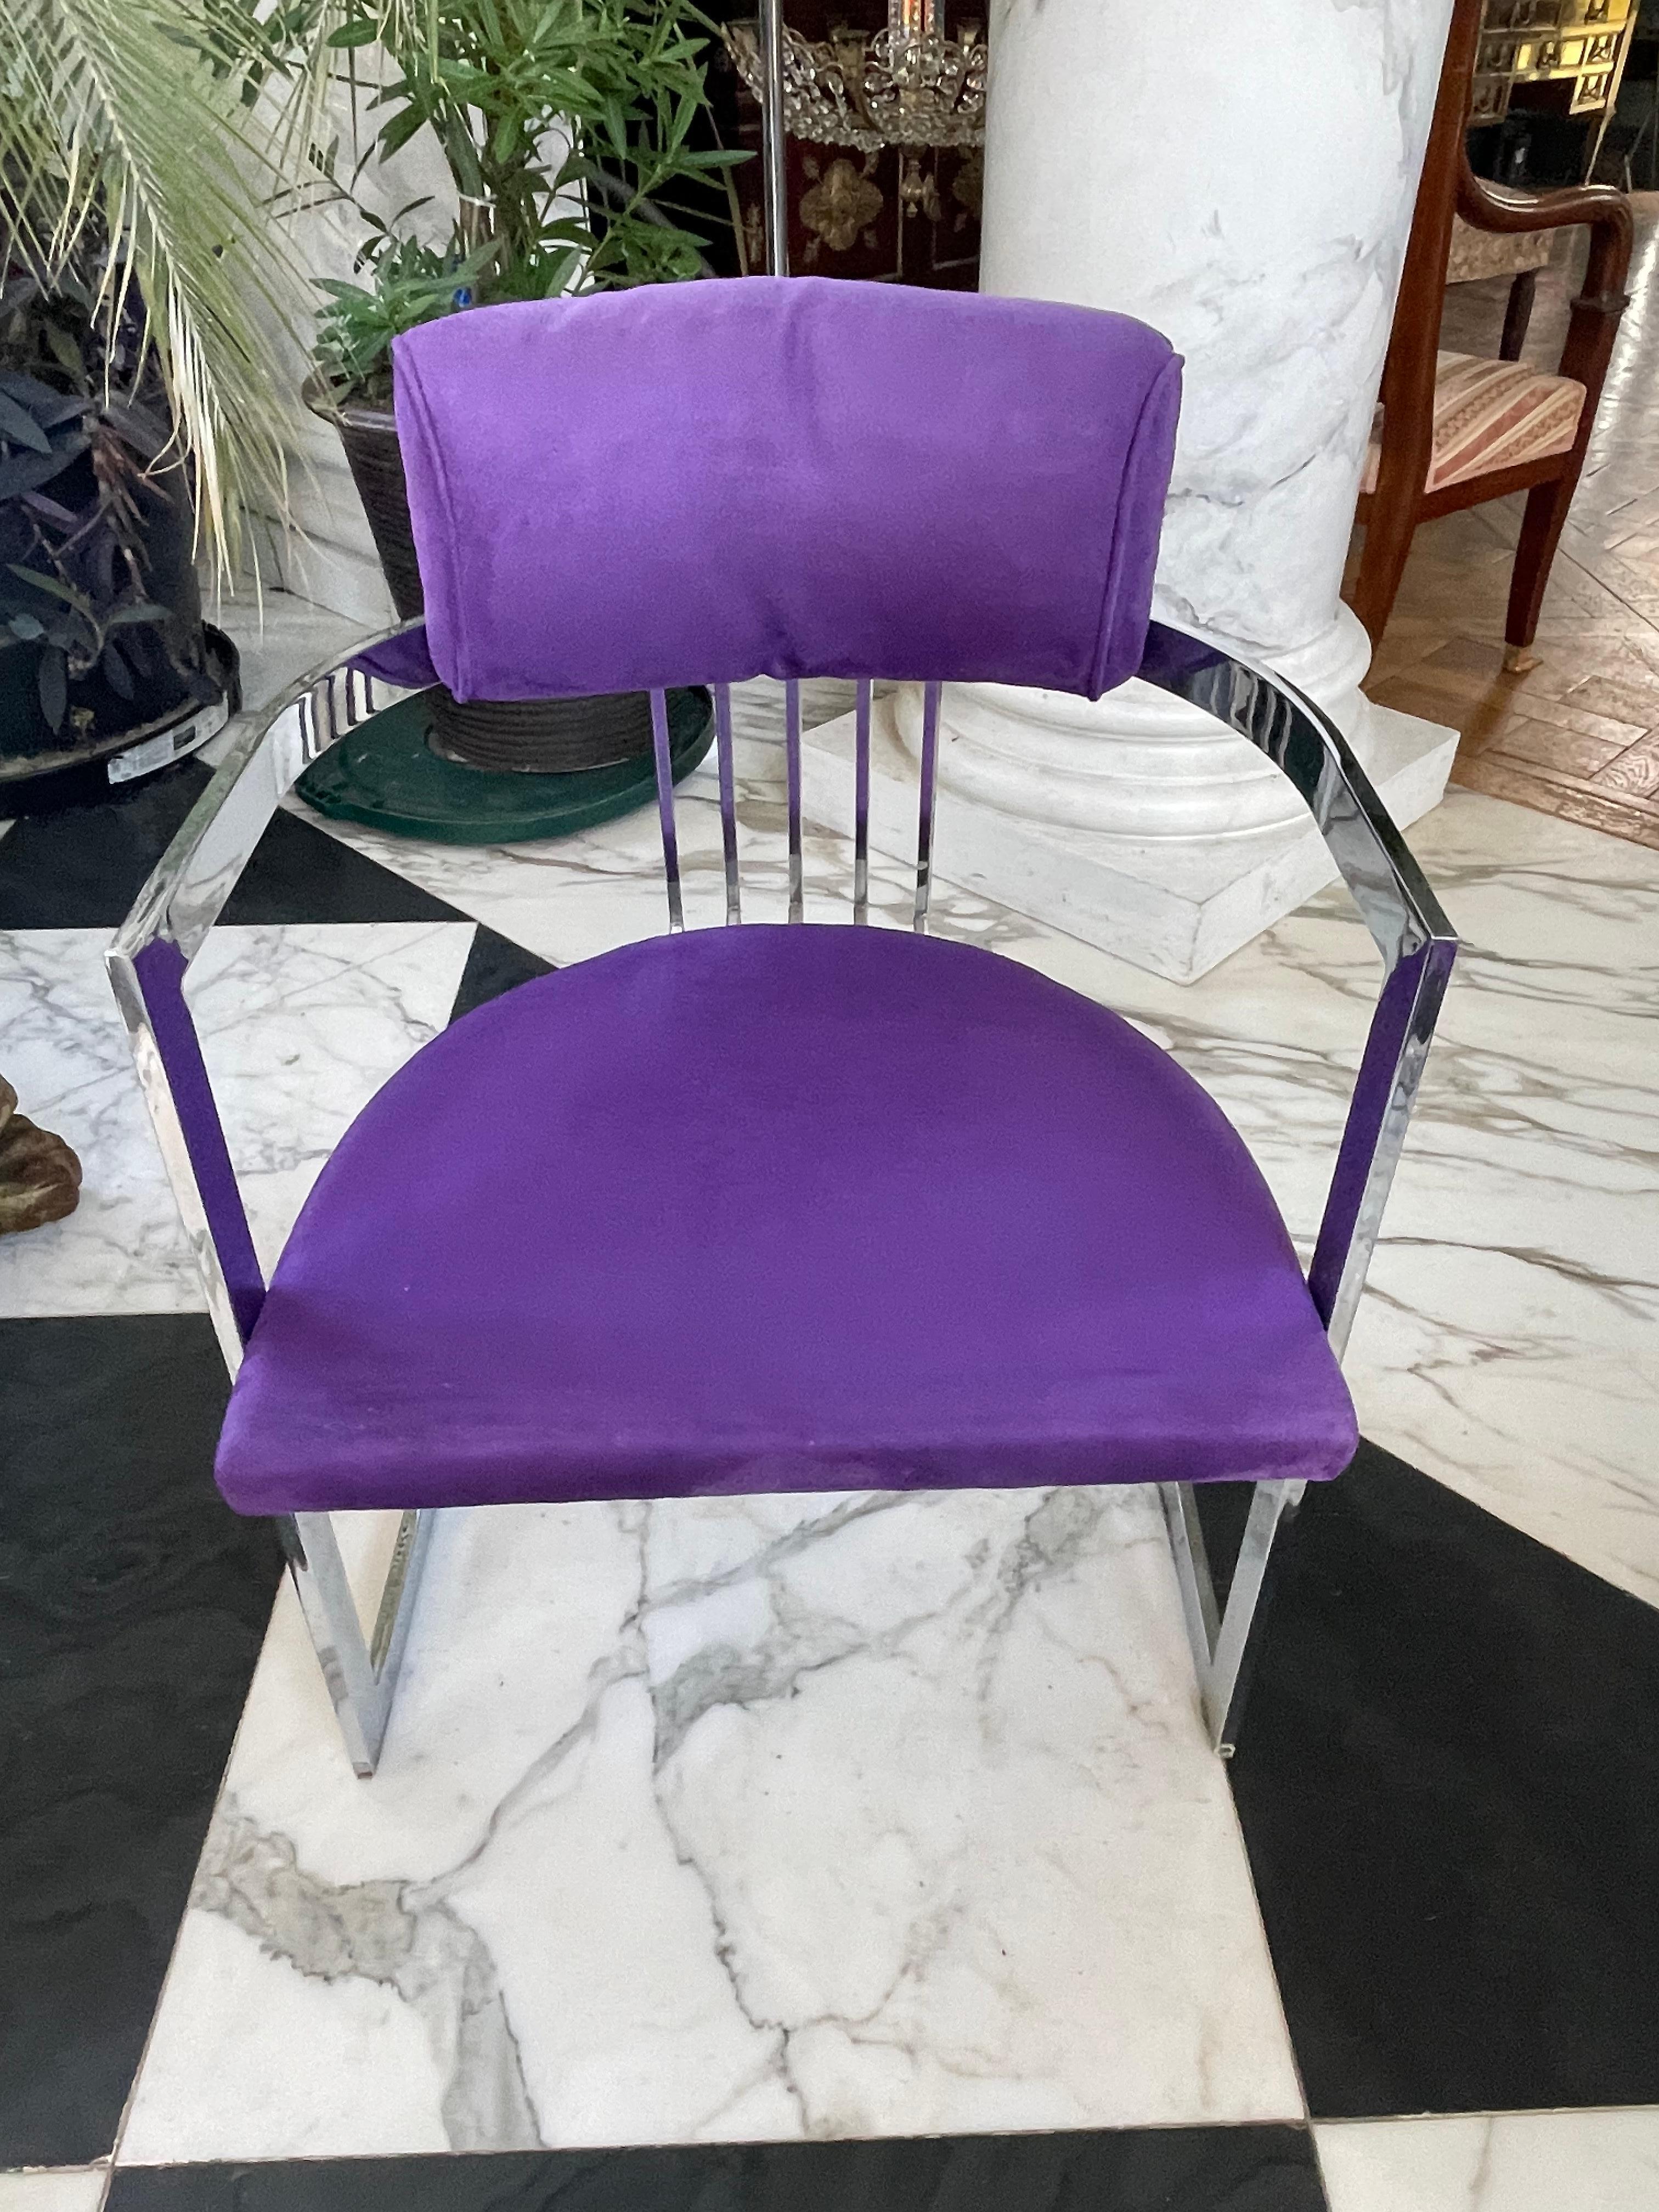 4 Milo Baughman Chrome Chairs in Purple Upholstery  For Sale 1